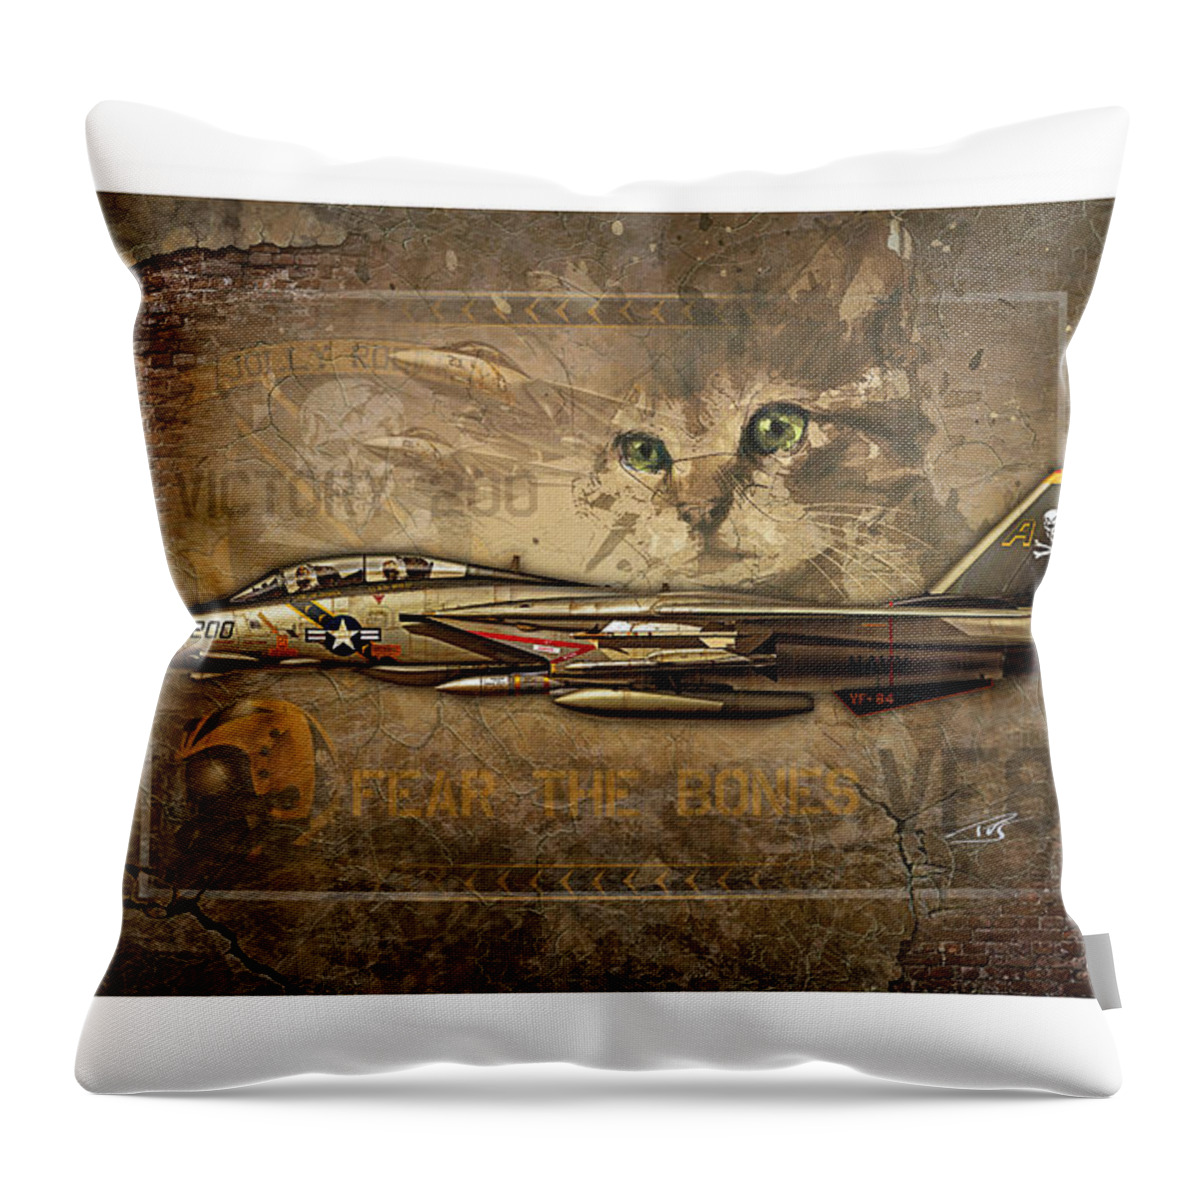 War Throw Pillow featuring the digital art Victory Two Hundred by Peter Van Stigt